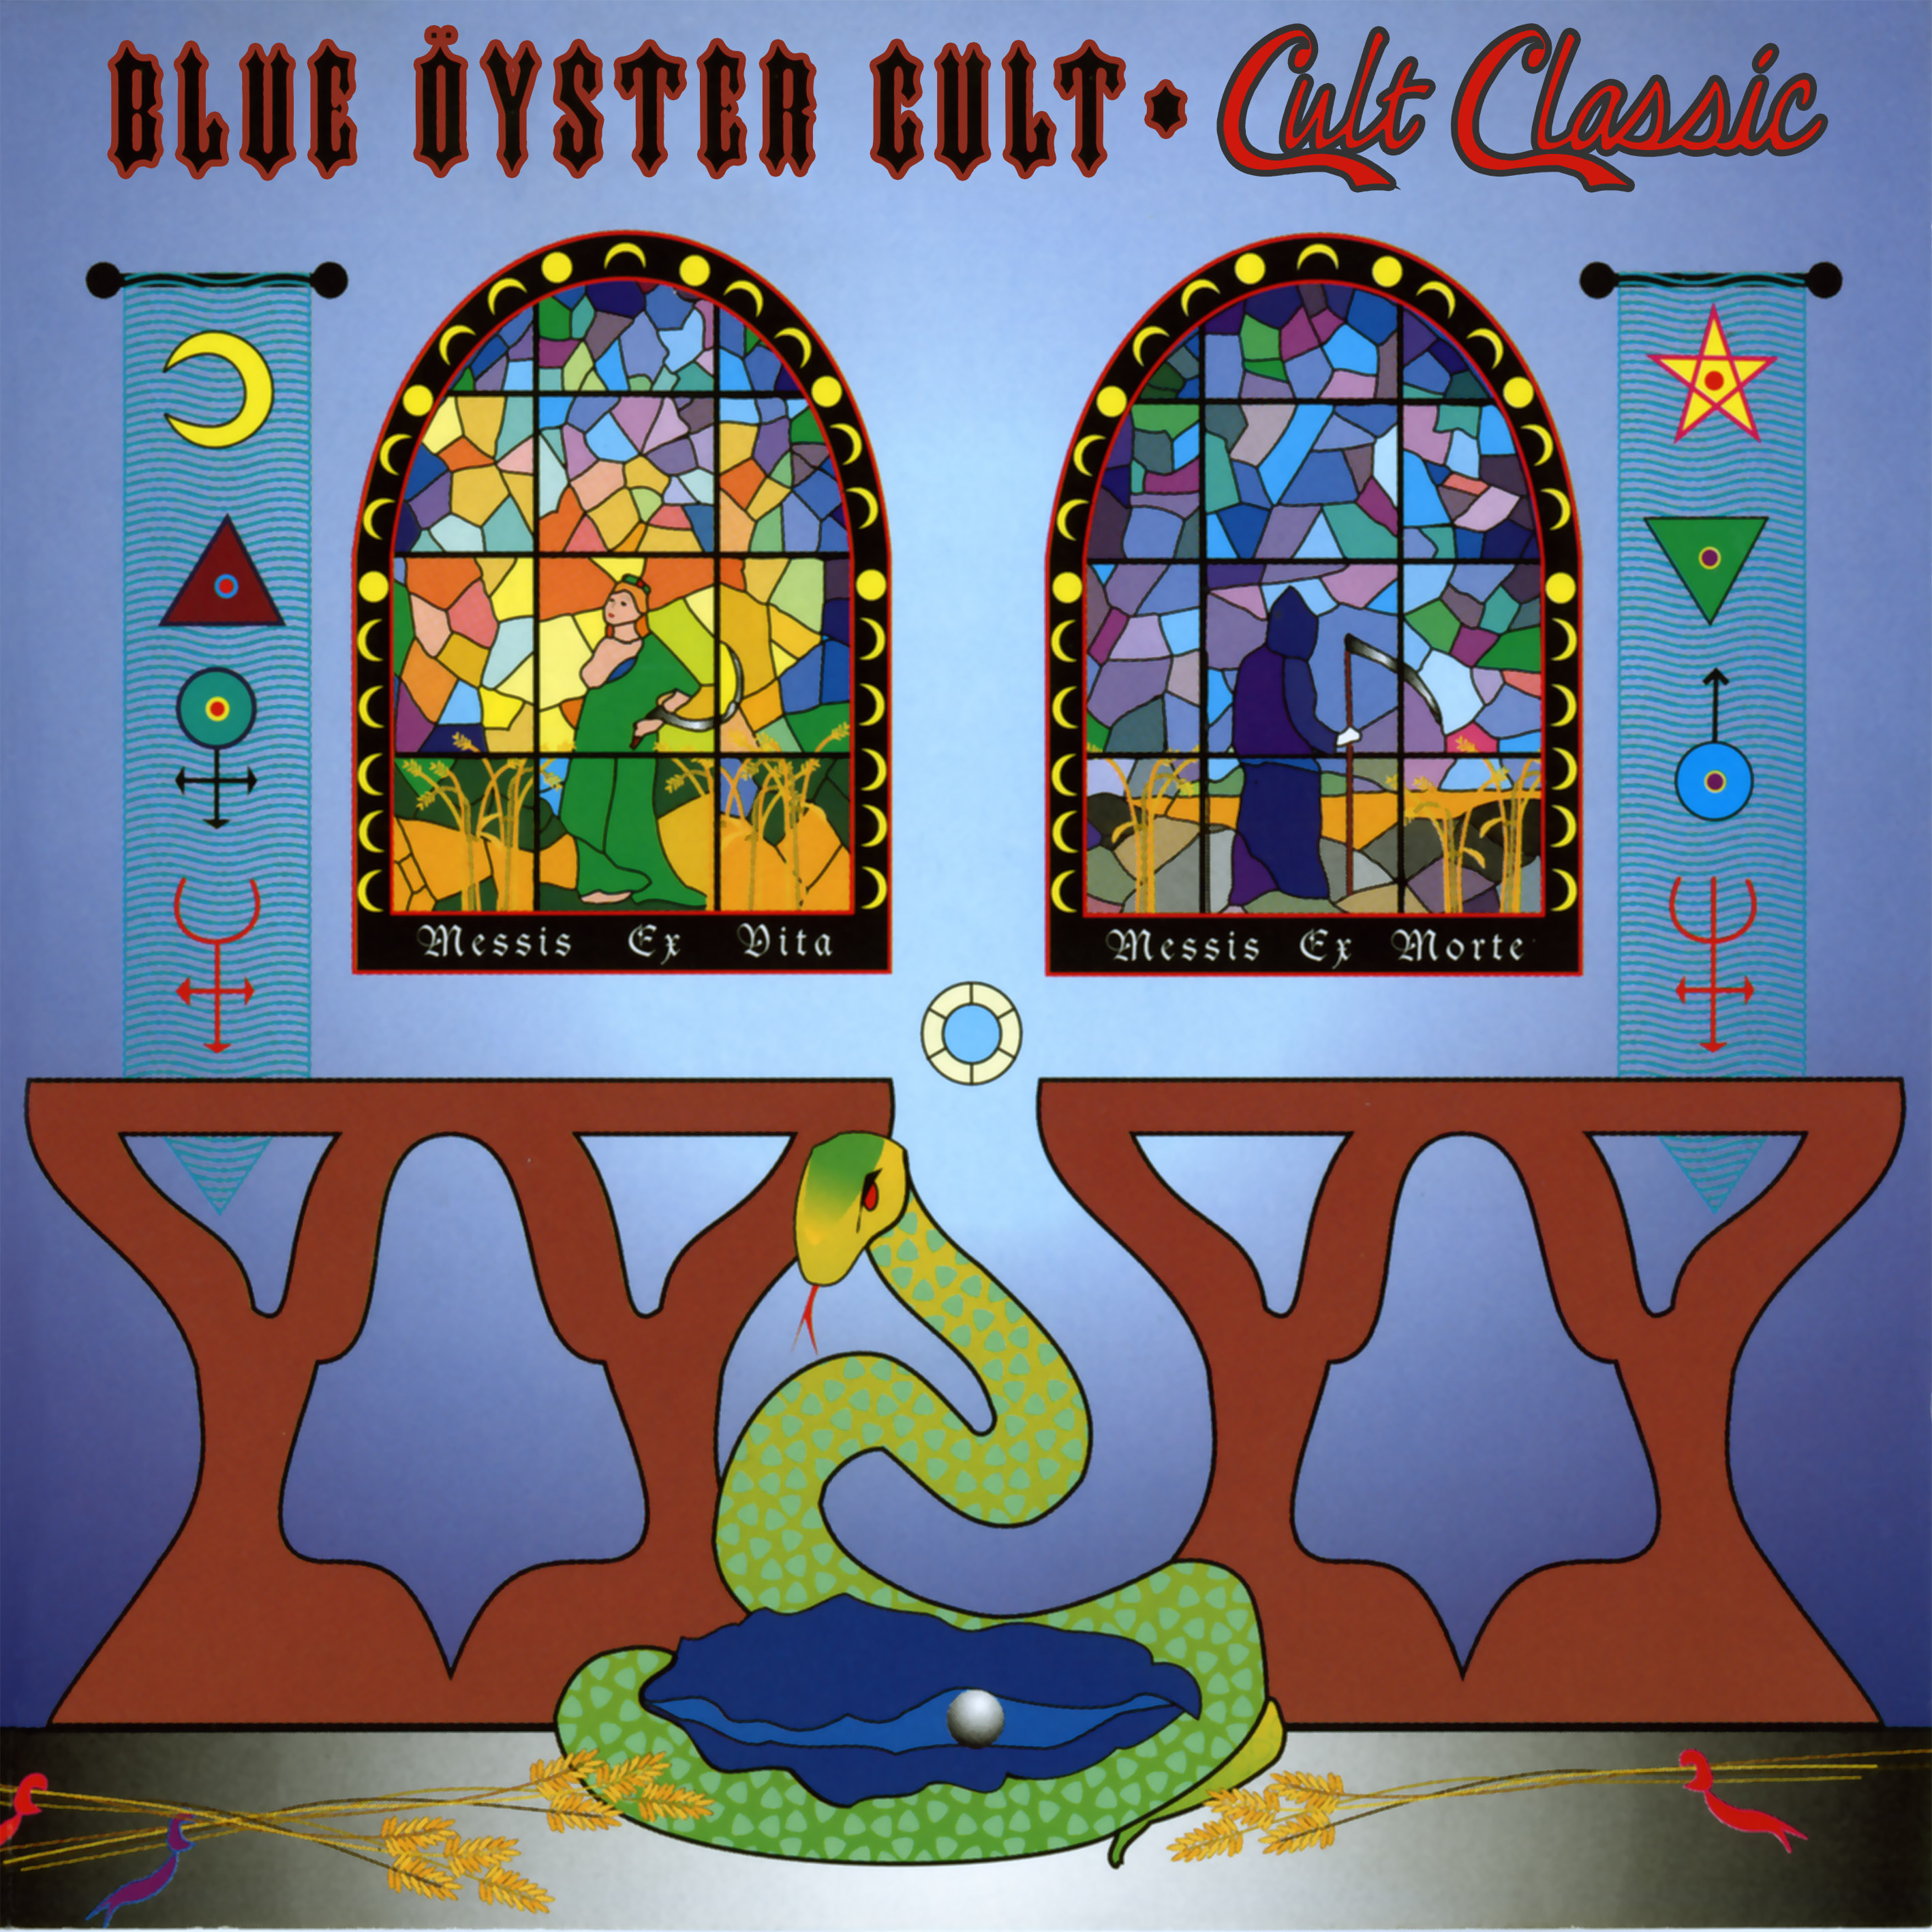 BLUE OYSTER CULT - “Cult Classic”